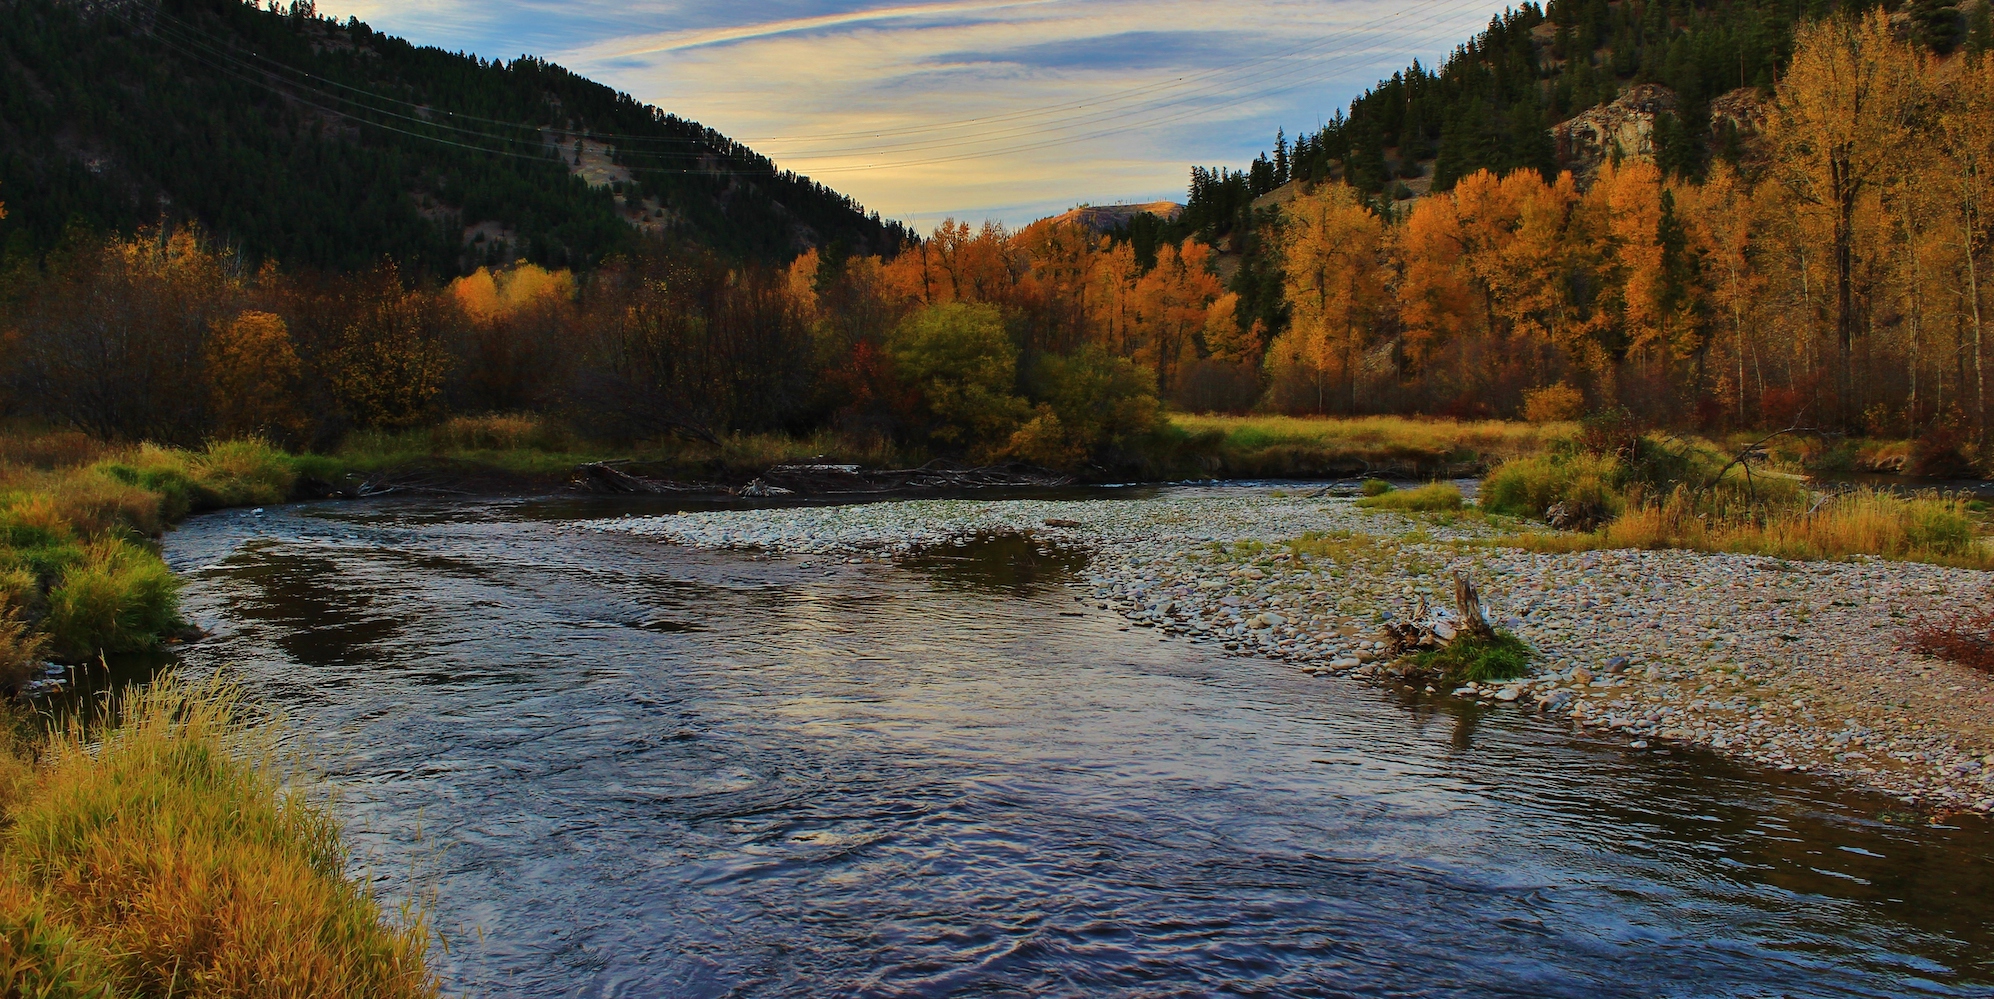 Clark Fork river in Missoula Montana on a fall day with the trees on the riverbank in prime fall colors